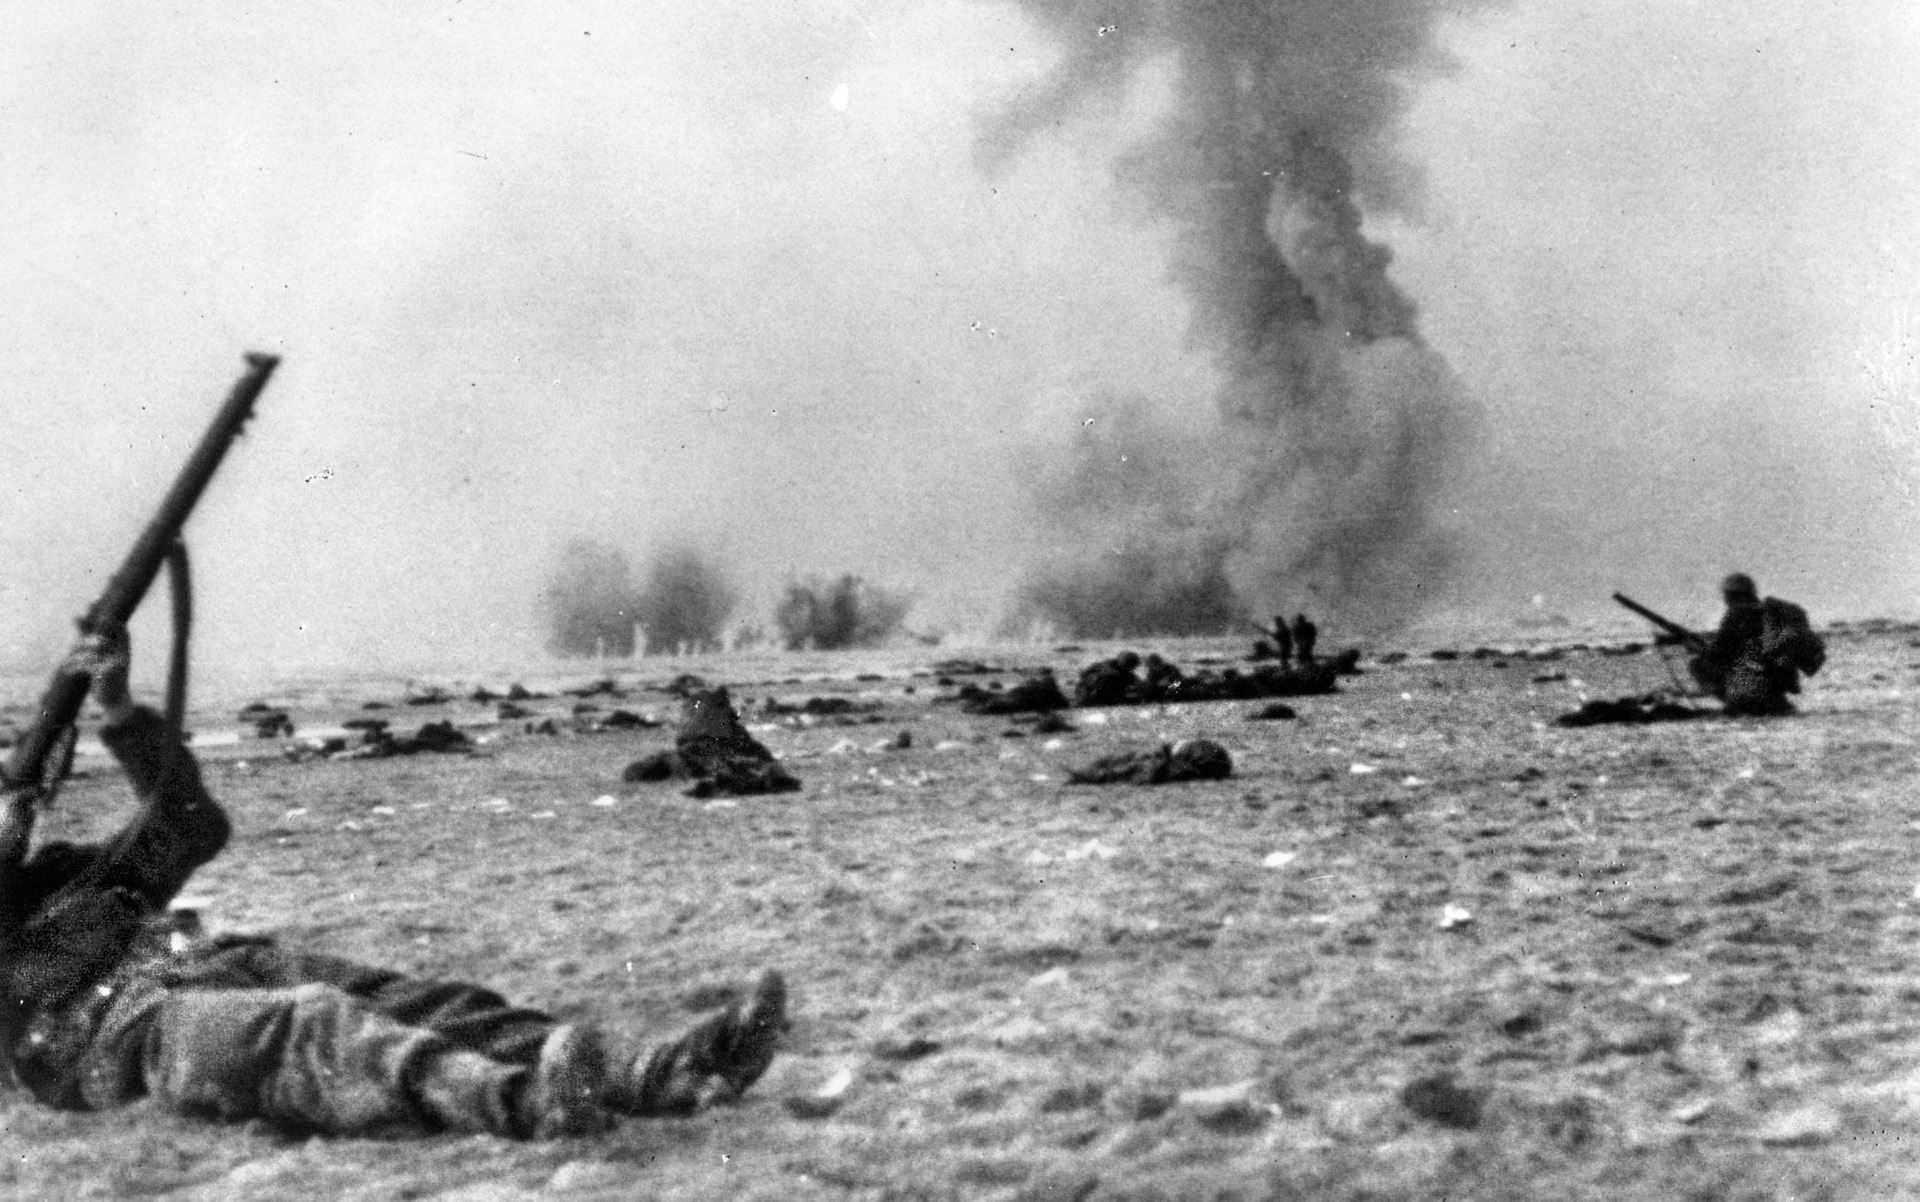 British soldiers, trapped in the open on the beach at Dunkirk, fire their rifles at low-flying German fighter planes intent on strafing them. British veterans remembered that the rifle fire had the desired effect of driving away some aggressive German pilots.